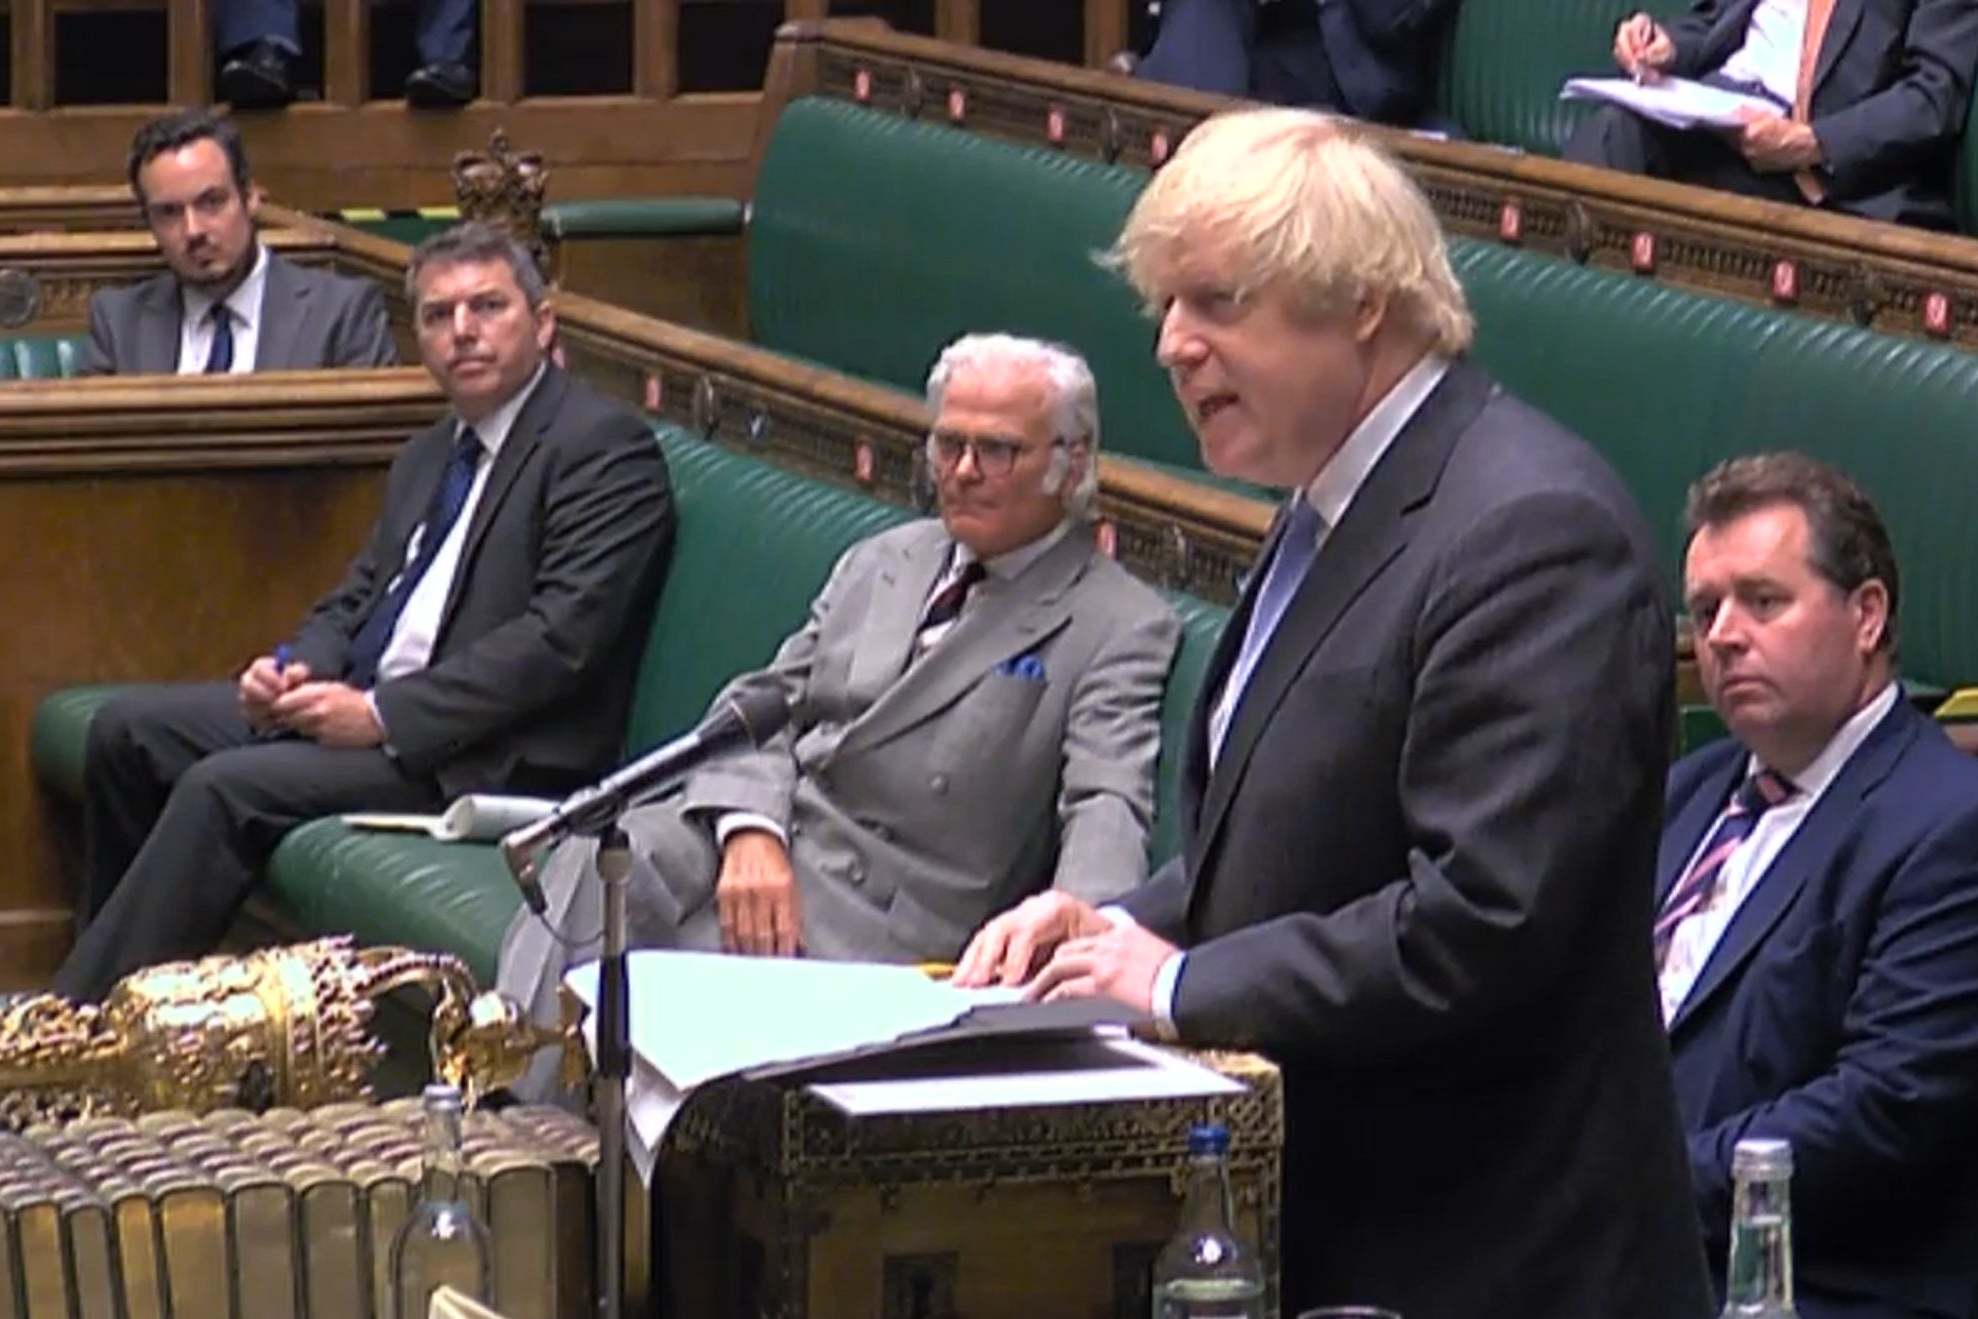 Boris Johnson sets out lockdown relaxations in the House of Commons (AFP/Getty)